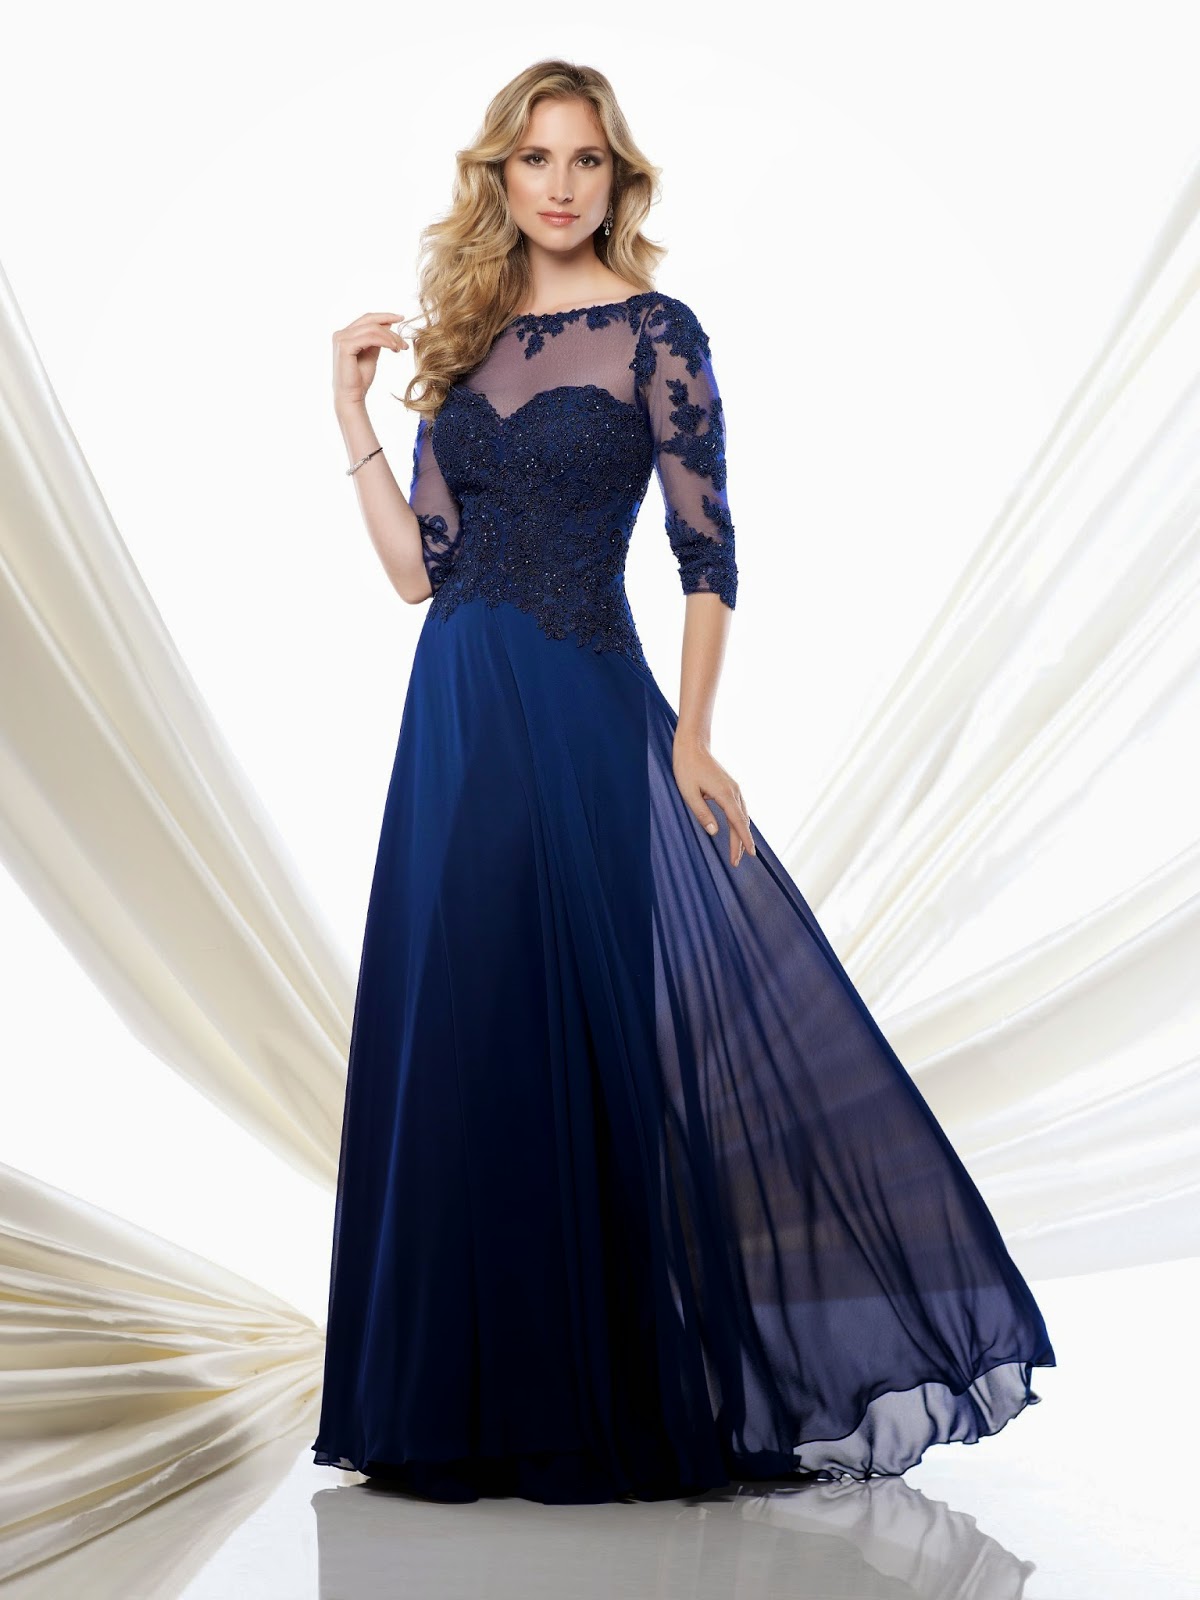 Fly Me to the Moon: Check Out Our Gorgeous New Mother of the Occasion Gowns